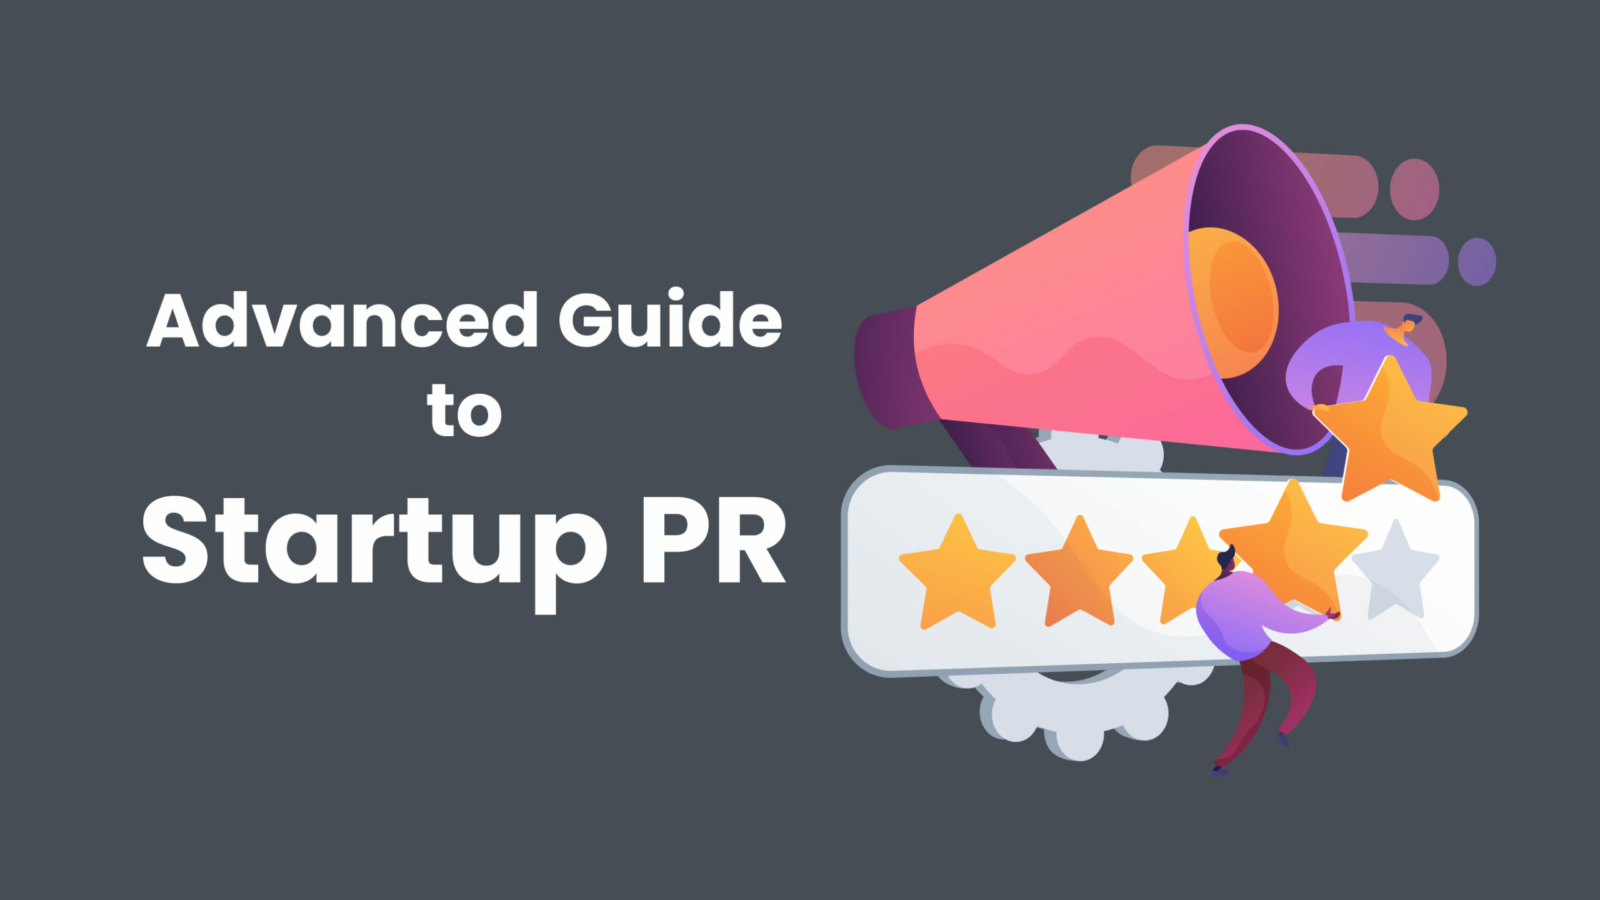 Advanced Guide to Startup PR